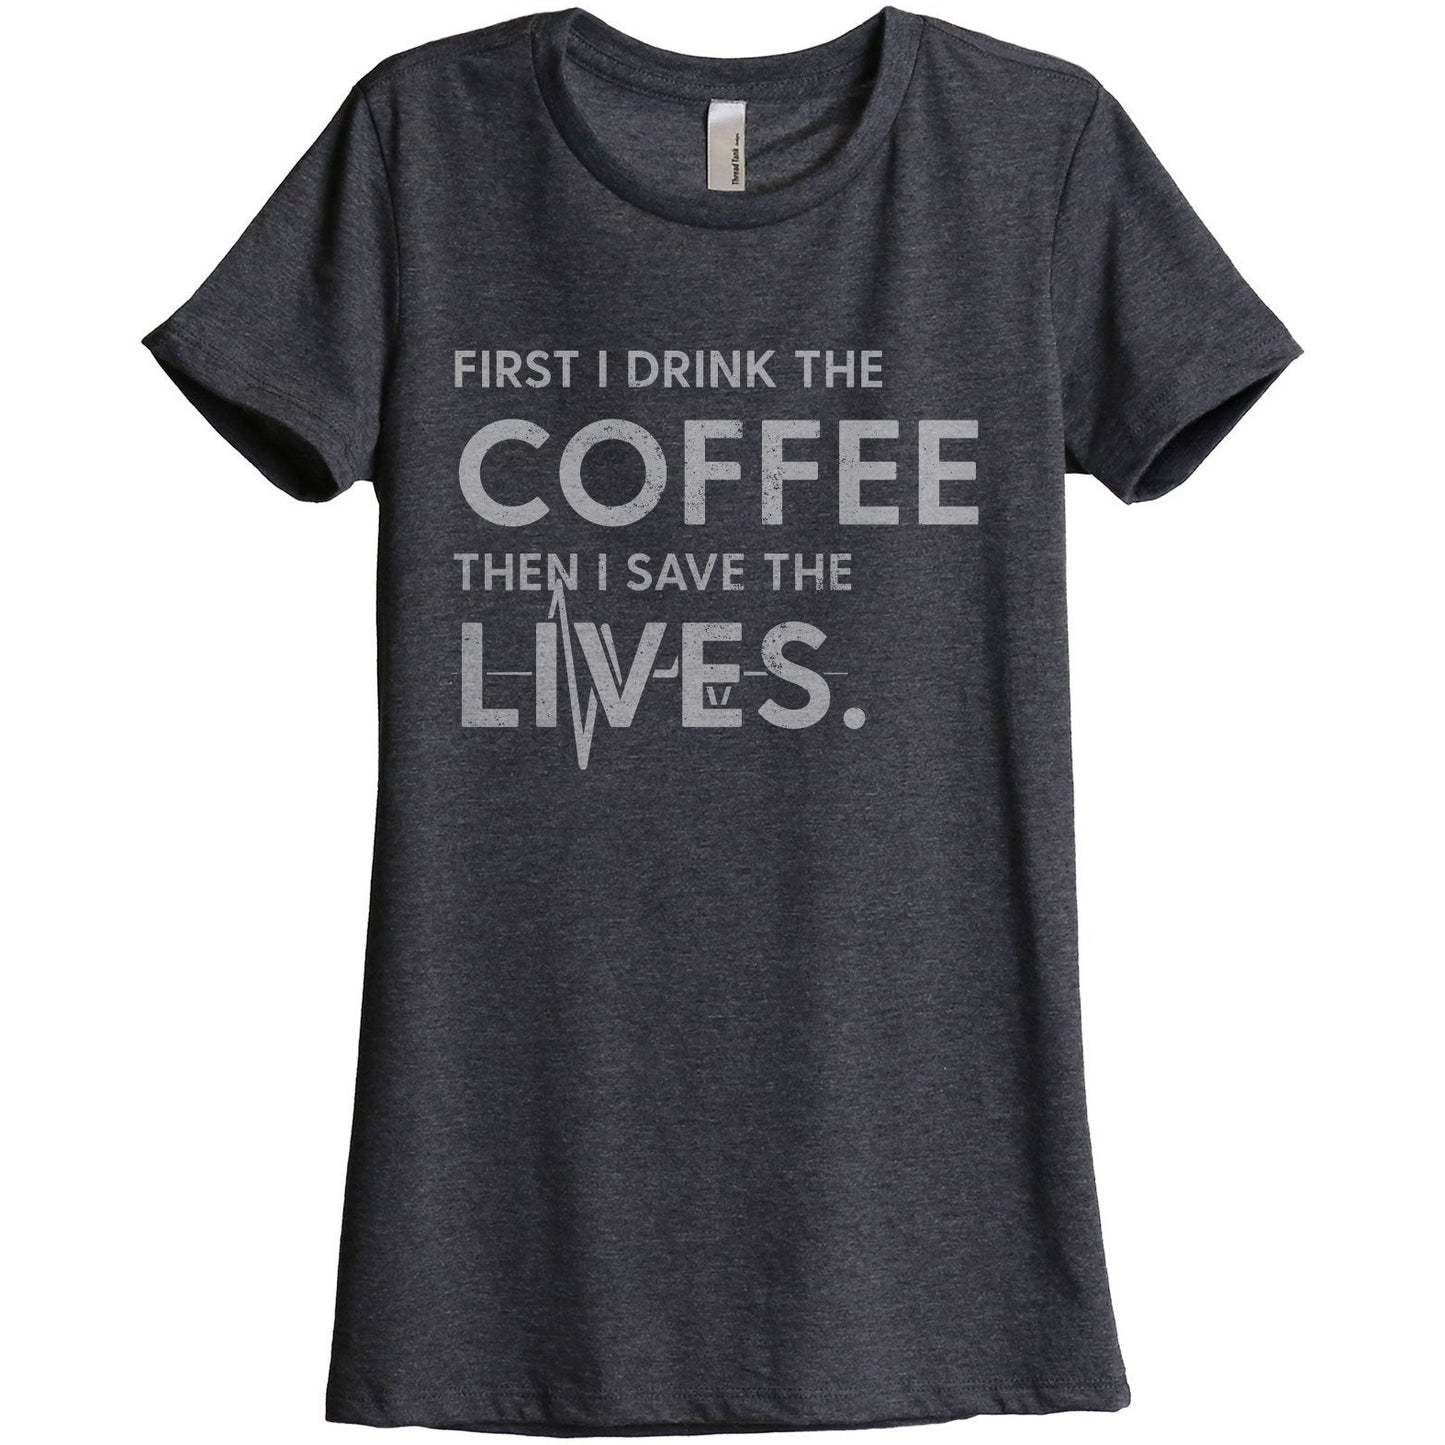 First I Drink The Coffee Then I Save The Lives Women's Relaxed Crewneck T-Shirt Top Tee Charcoal Grey
